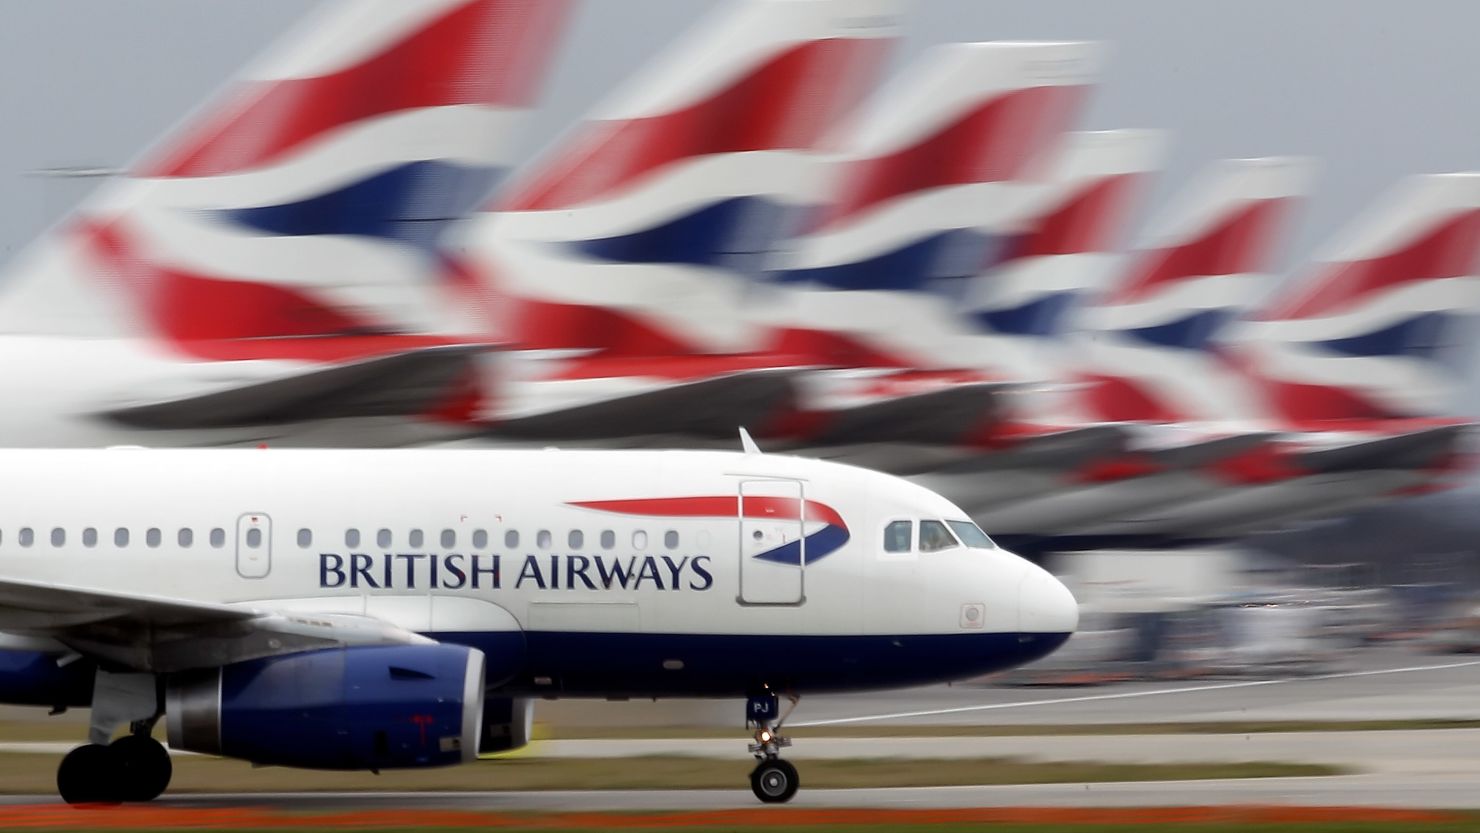 A man is suing British Airways, claiming he suffered injuries from sitting next to an obese passenger for 12 hours. 